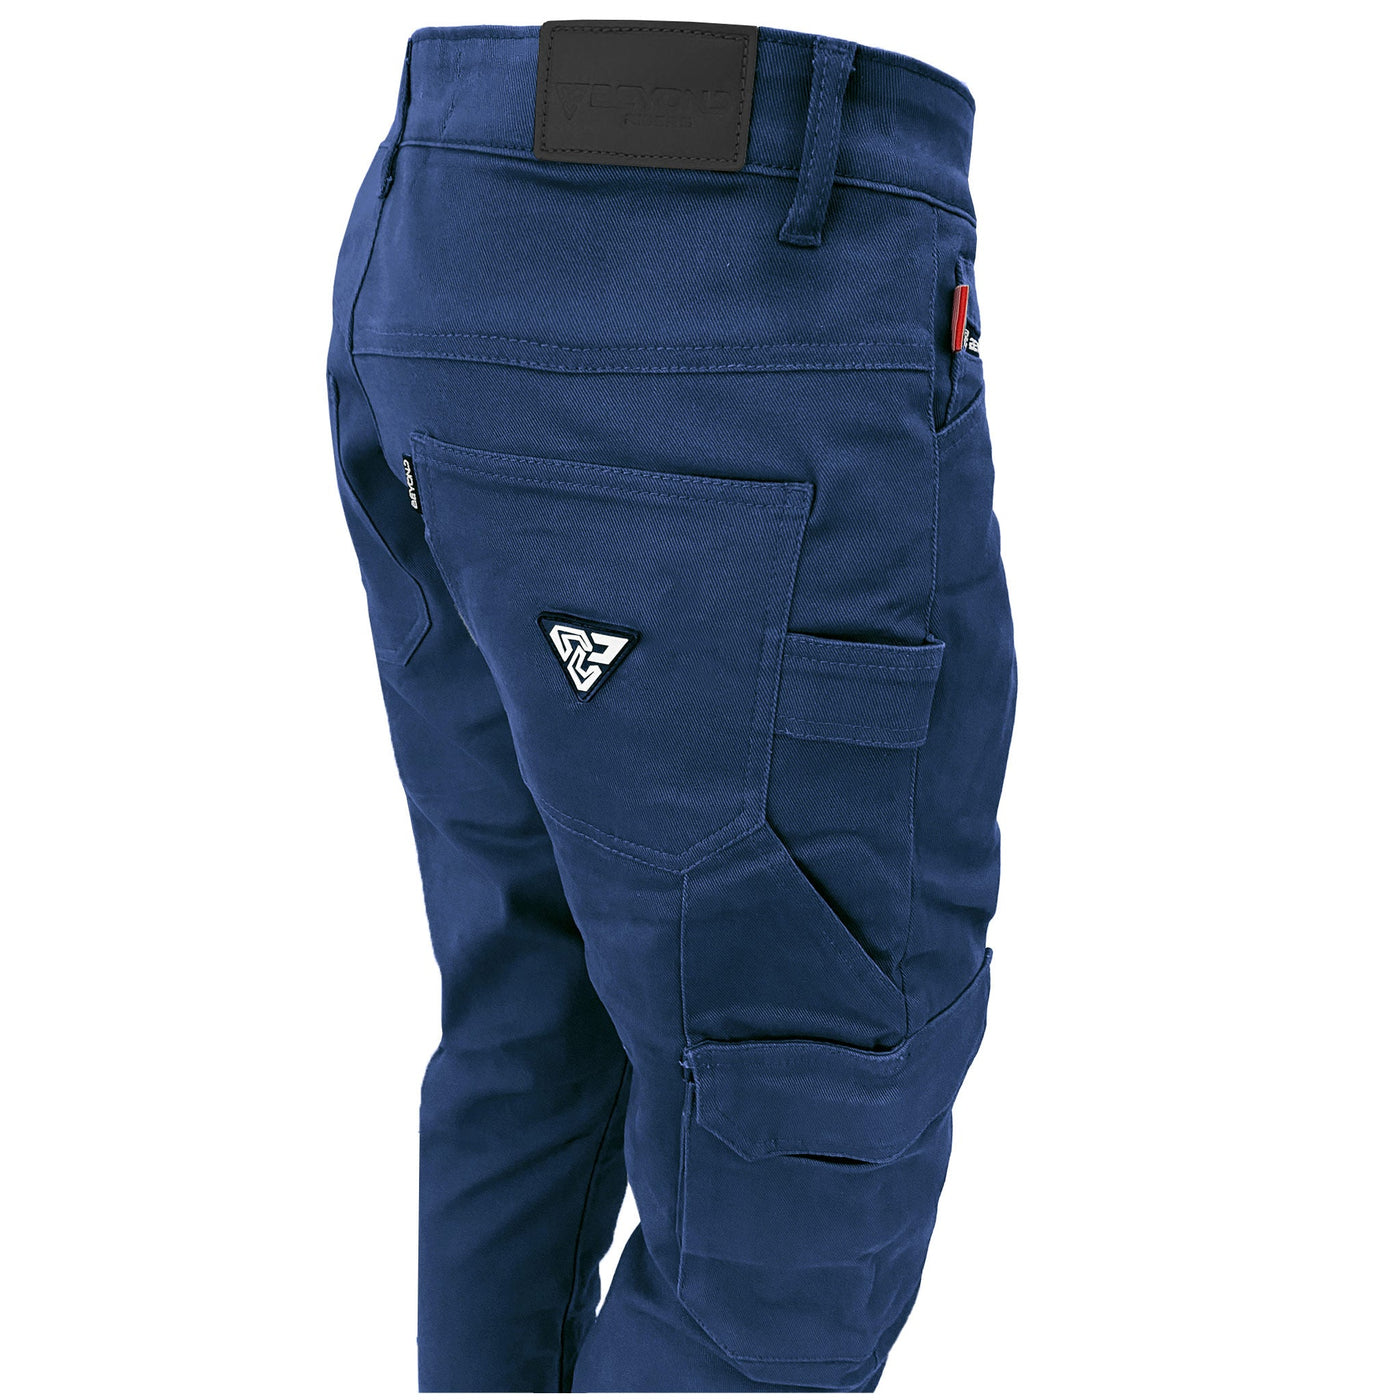 Straight Leg Cargo Pants with Pads - Navy Blue